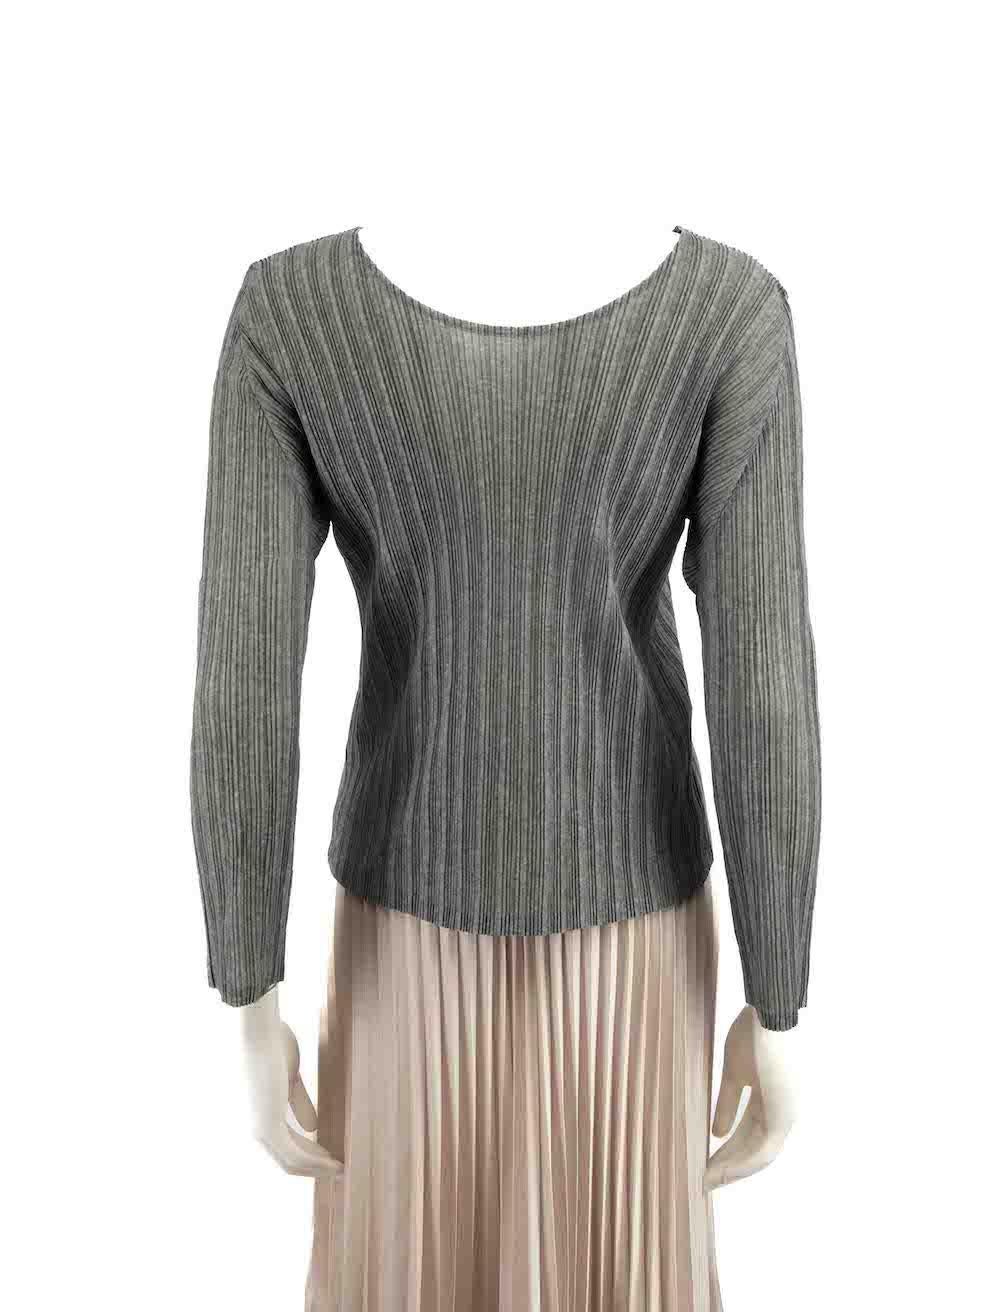 Issey Miyake Pleats Please Grey Round Neck Pleated Top Size M In New Condition For Sale In London, GB